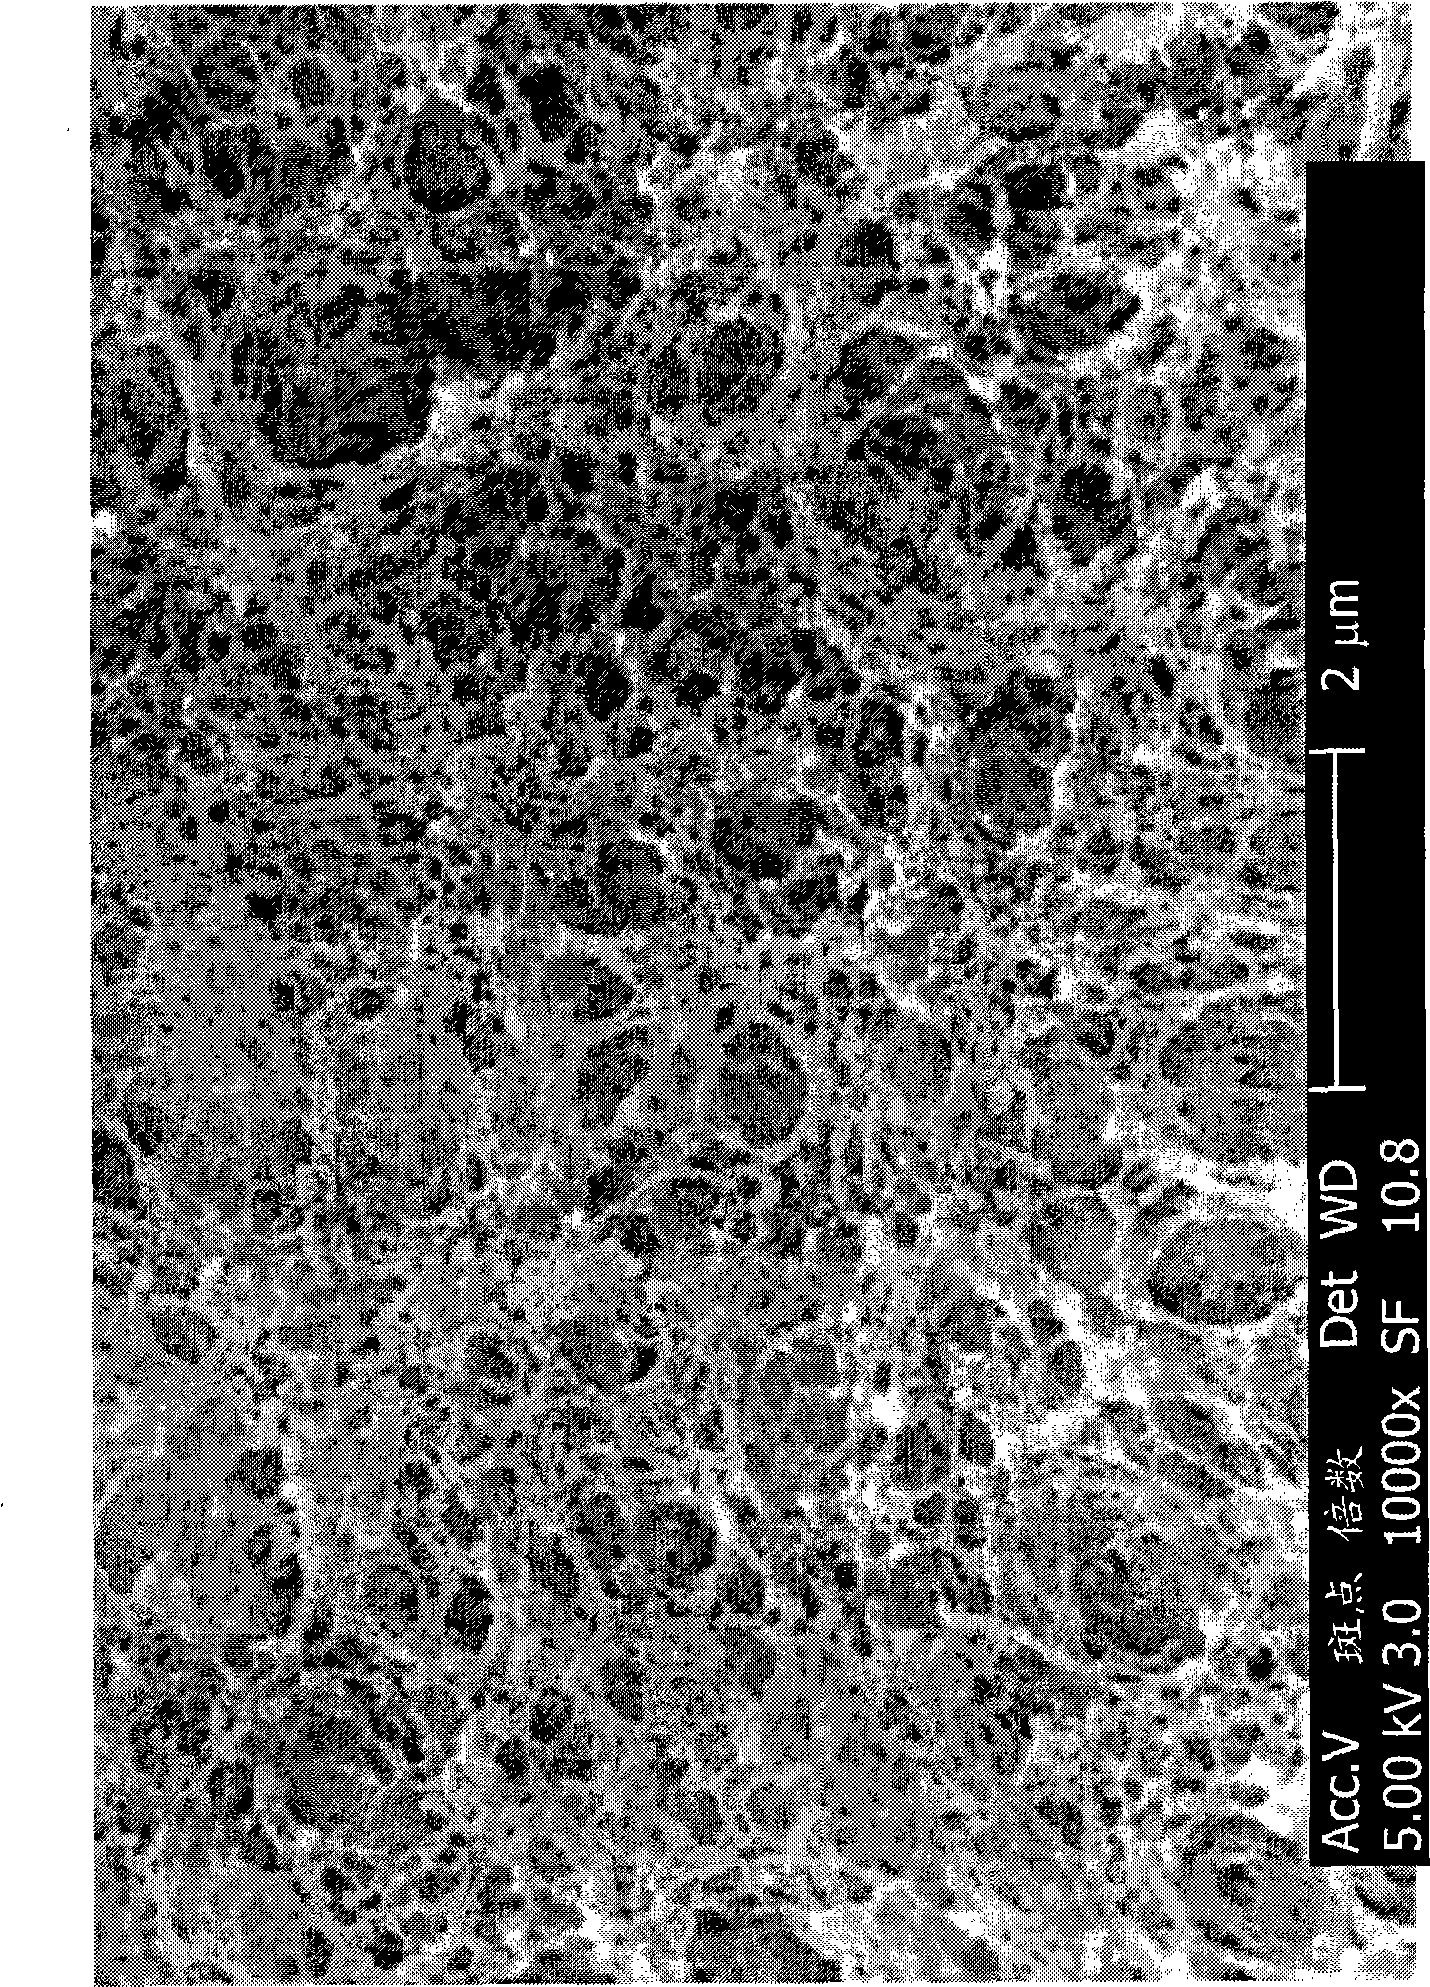 Porous biological assay substrate and method and device for producing such substrate